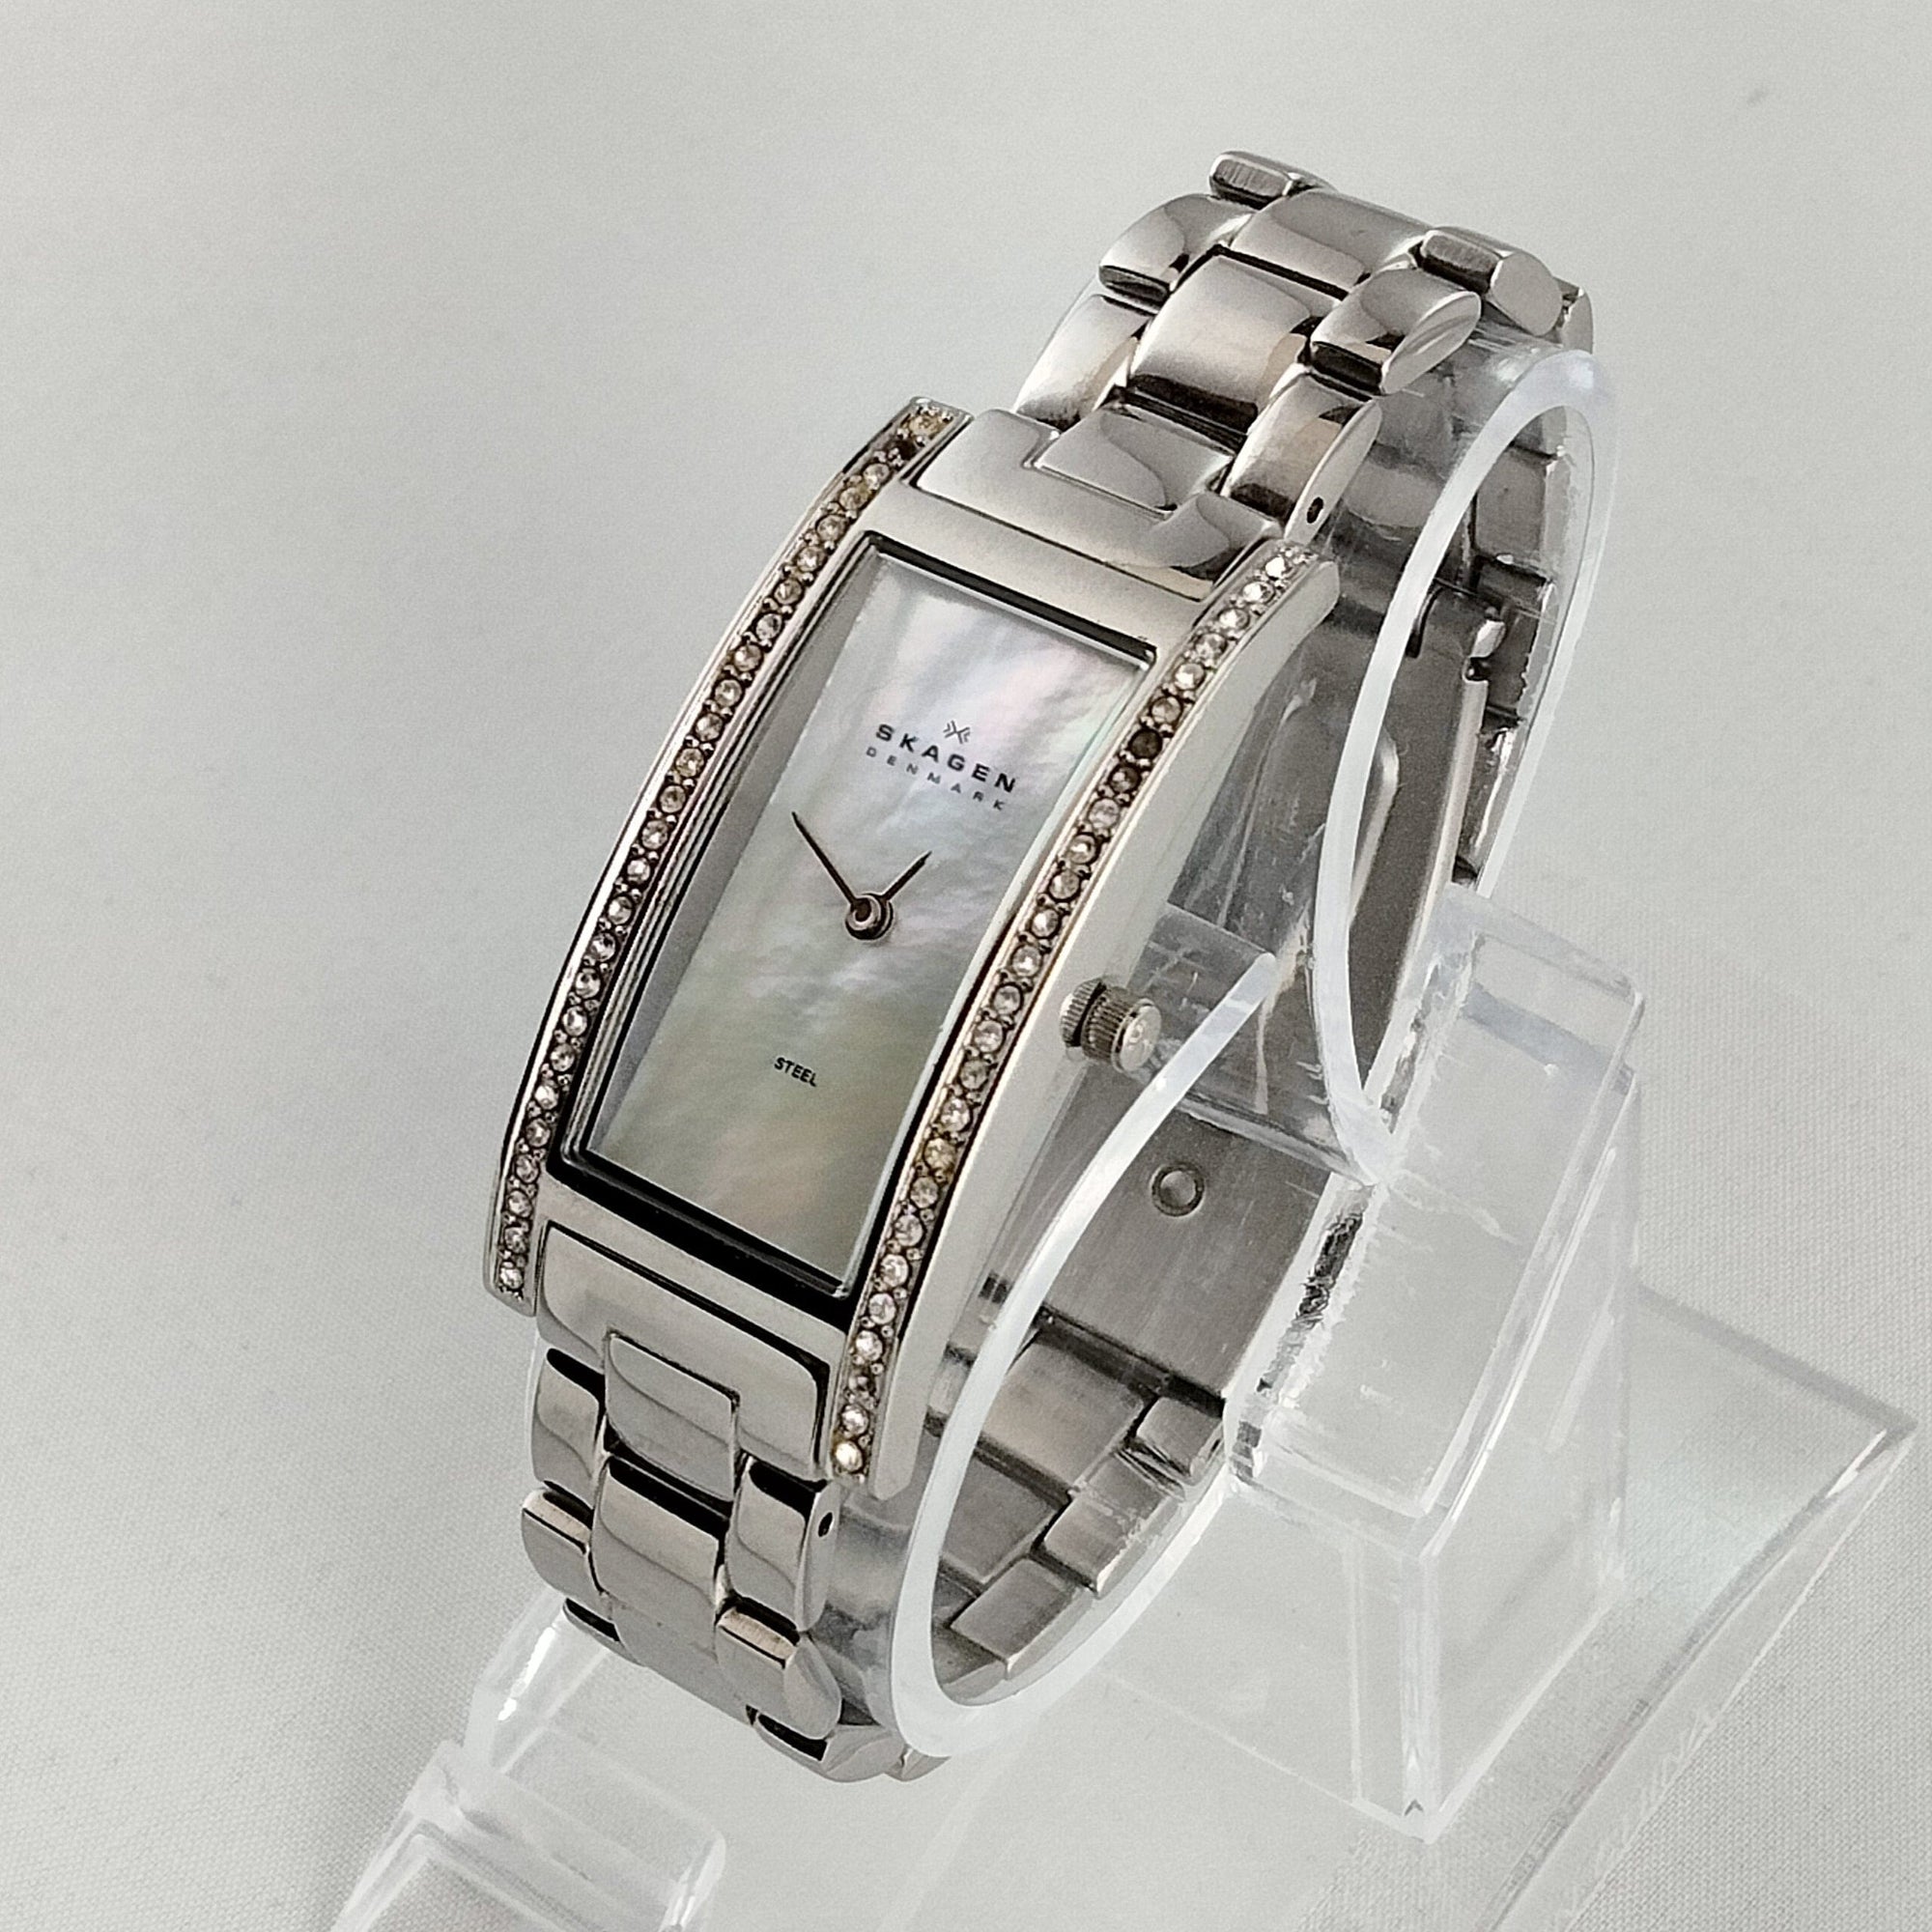 I Like Mikes Mid Century Modern Watches Skagen Women's Stainless Steel Watch, Mother of Pearl Rectangular Dial, Jewel Details, Link Bracelet